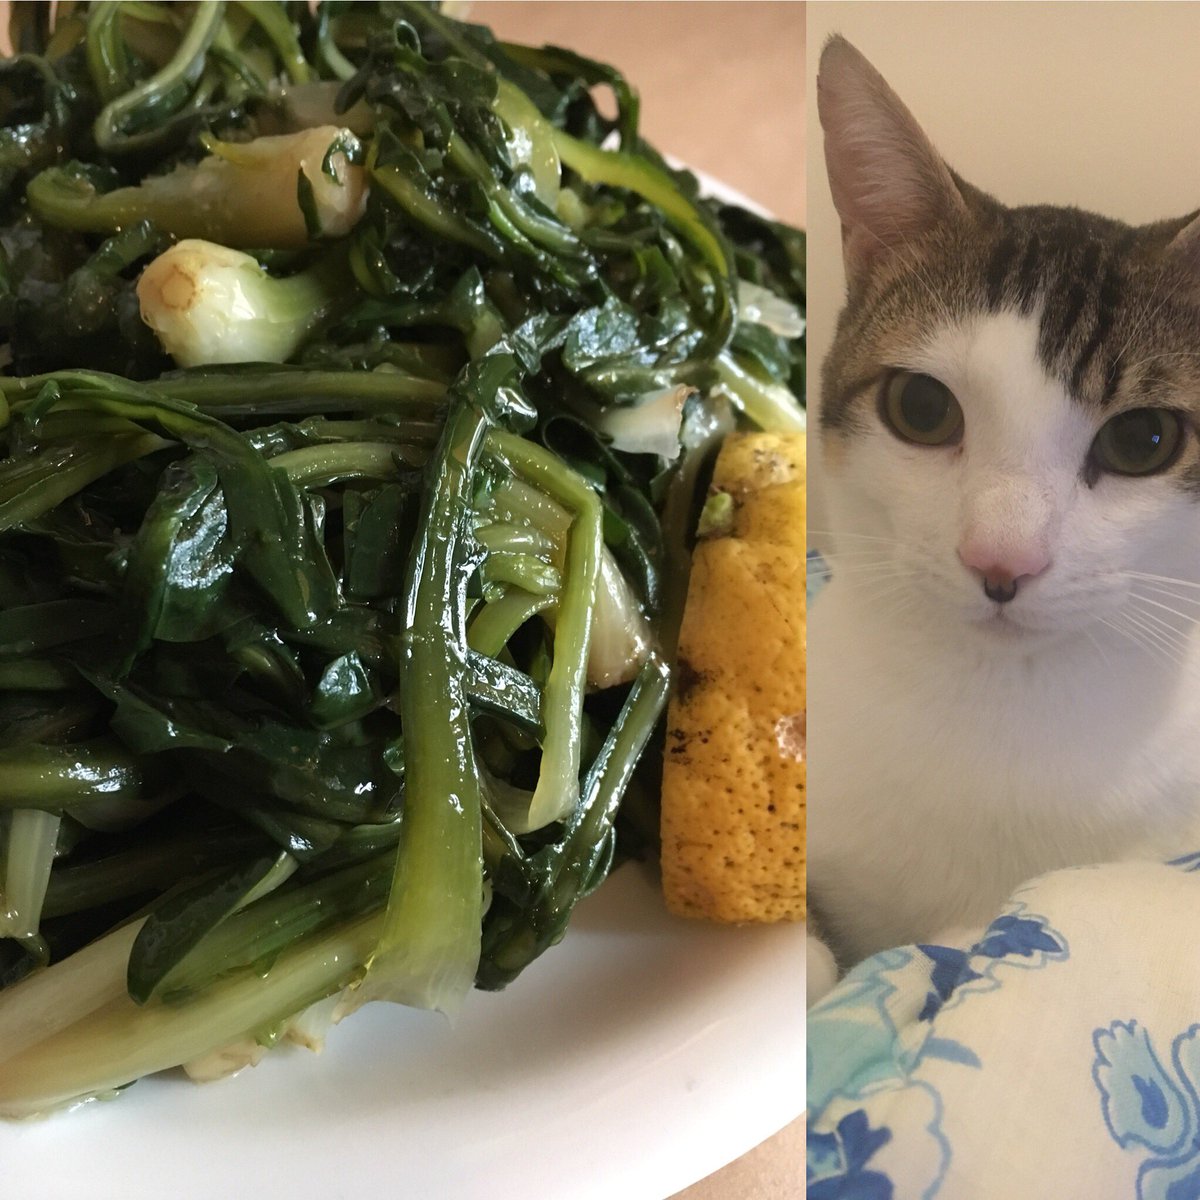 A rare grey, rainy day on Crete. Keeping it cosy with some kitty company and boiled spiny chicory. #horta #χόρτα #greens #crete #σταμναγκάθι #greece #nature #yummyandhealthy #deliciousandnutritious